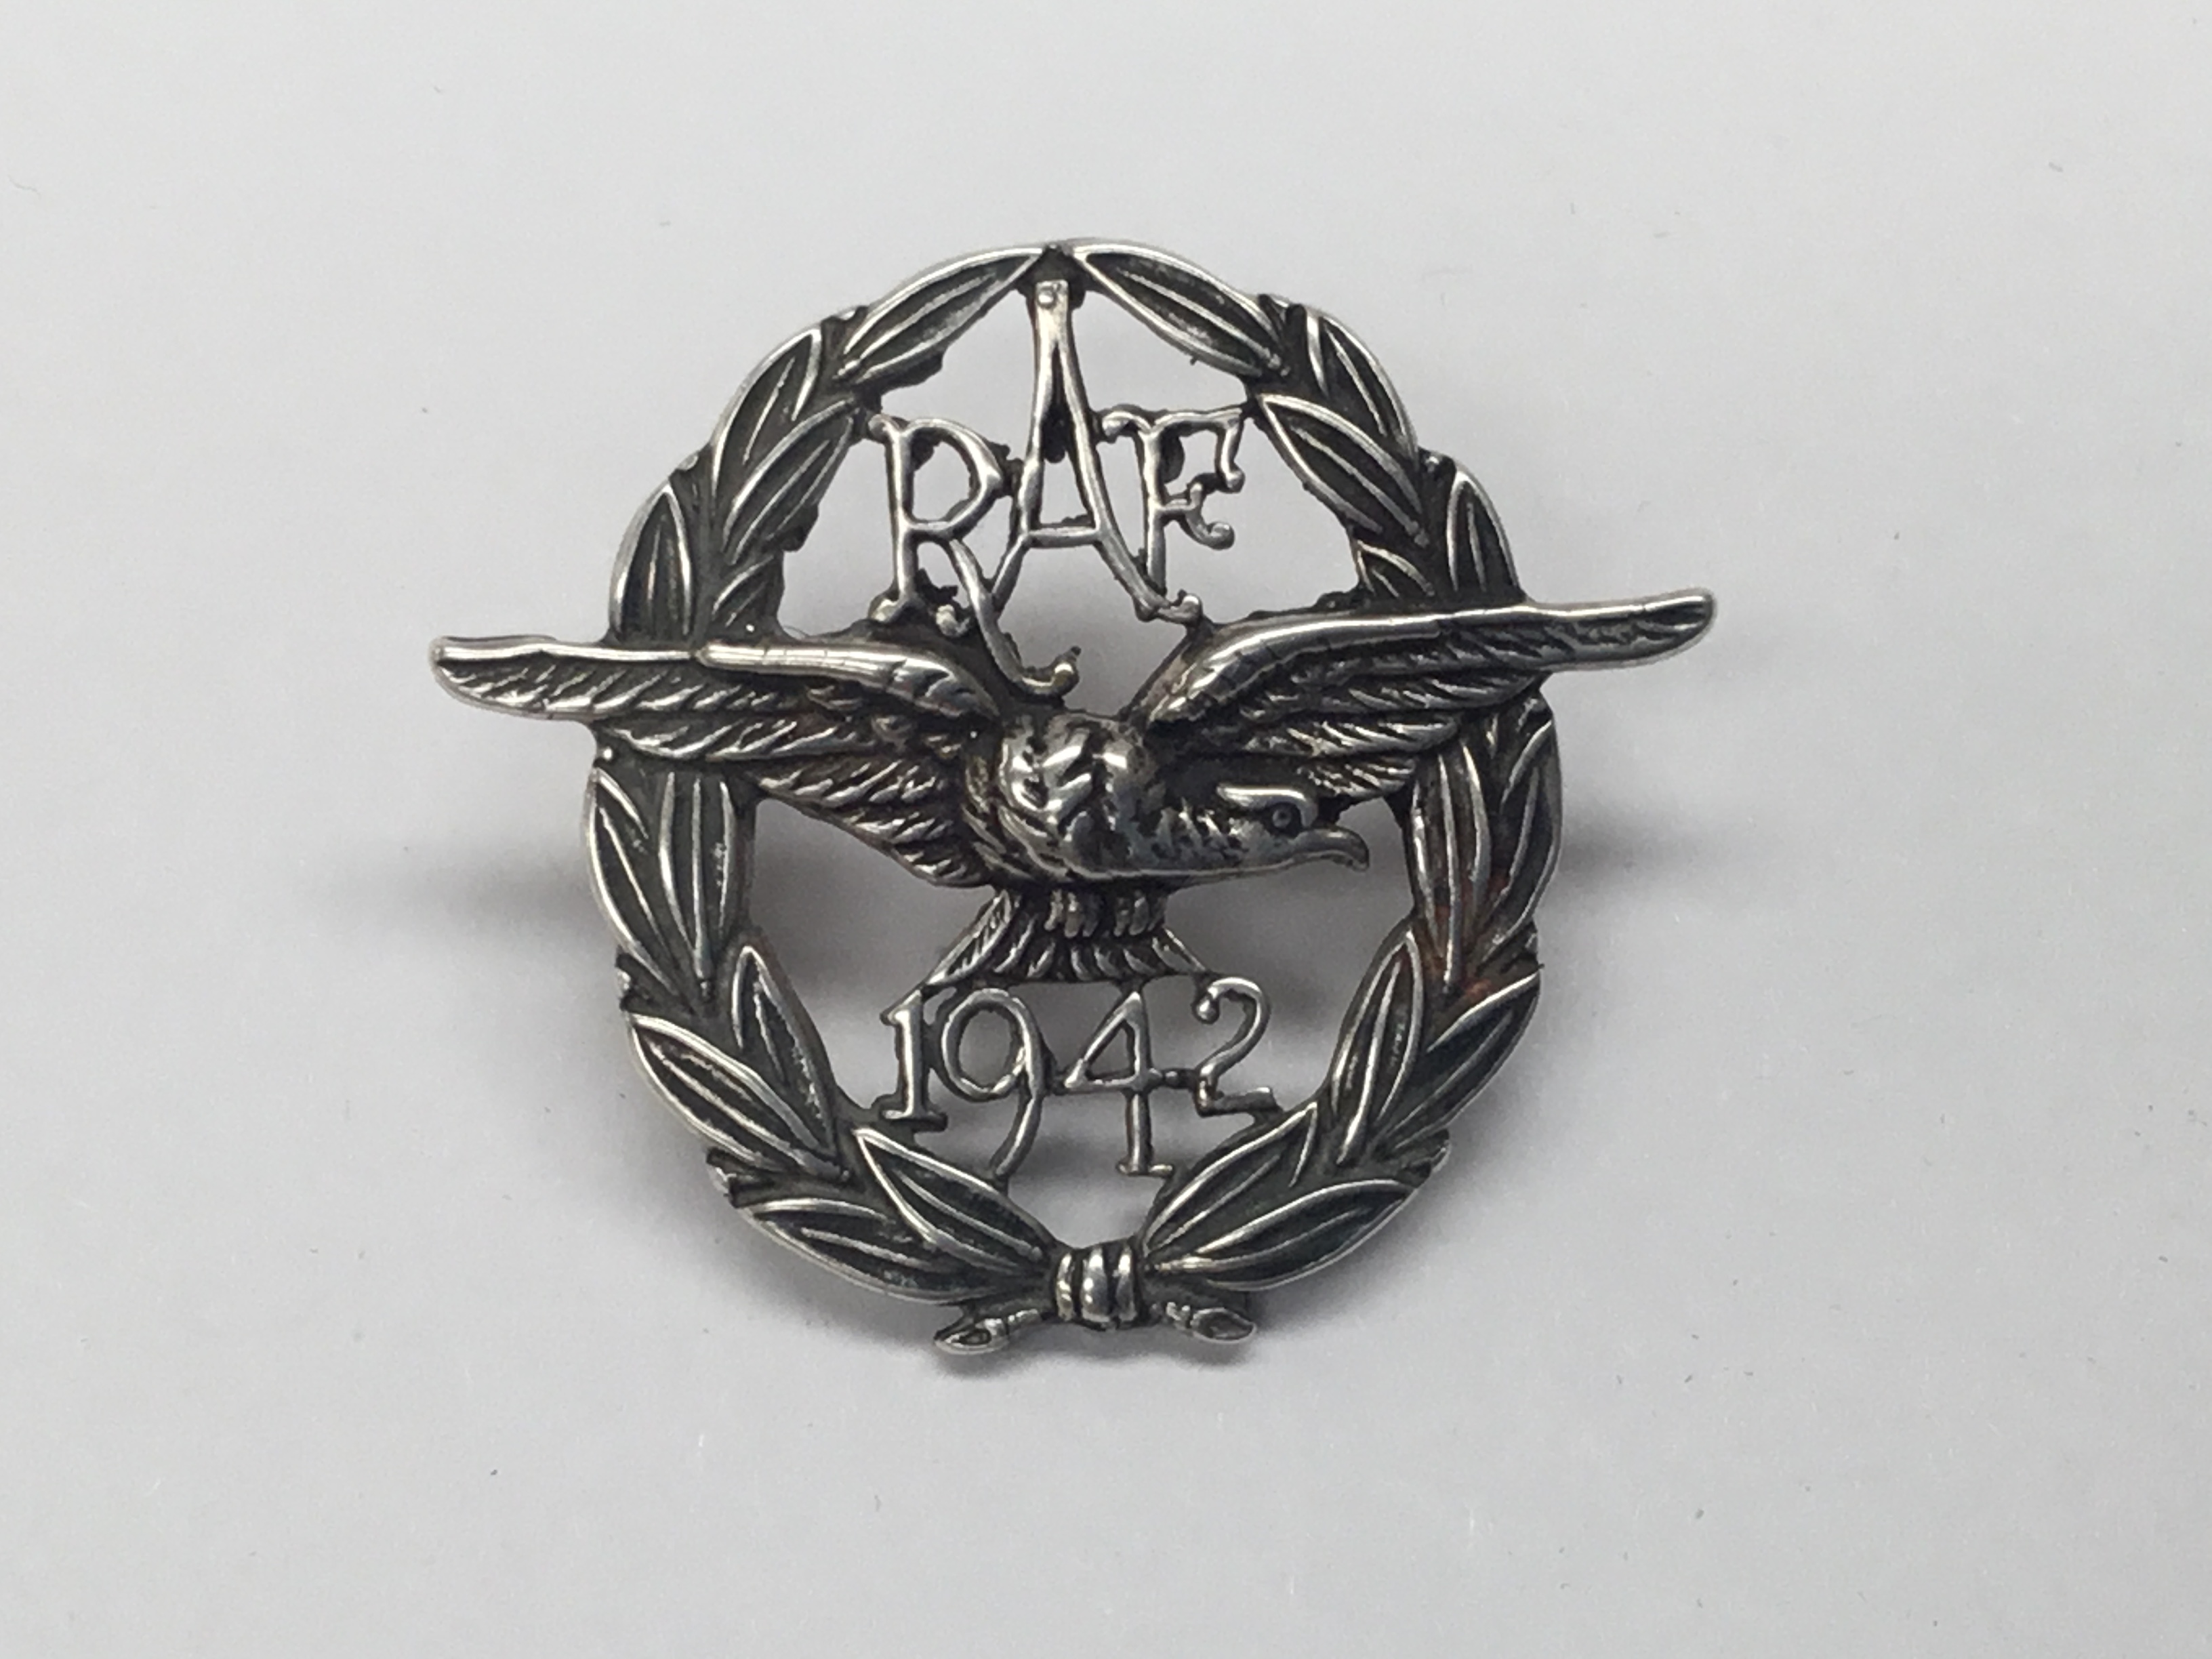 *** WITHDRAWN *** An extremely rare sterling silver WW2 era ‘1942’ American RAF Foreign Volunteer - Image 6 of 6